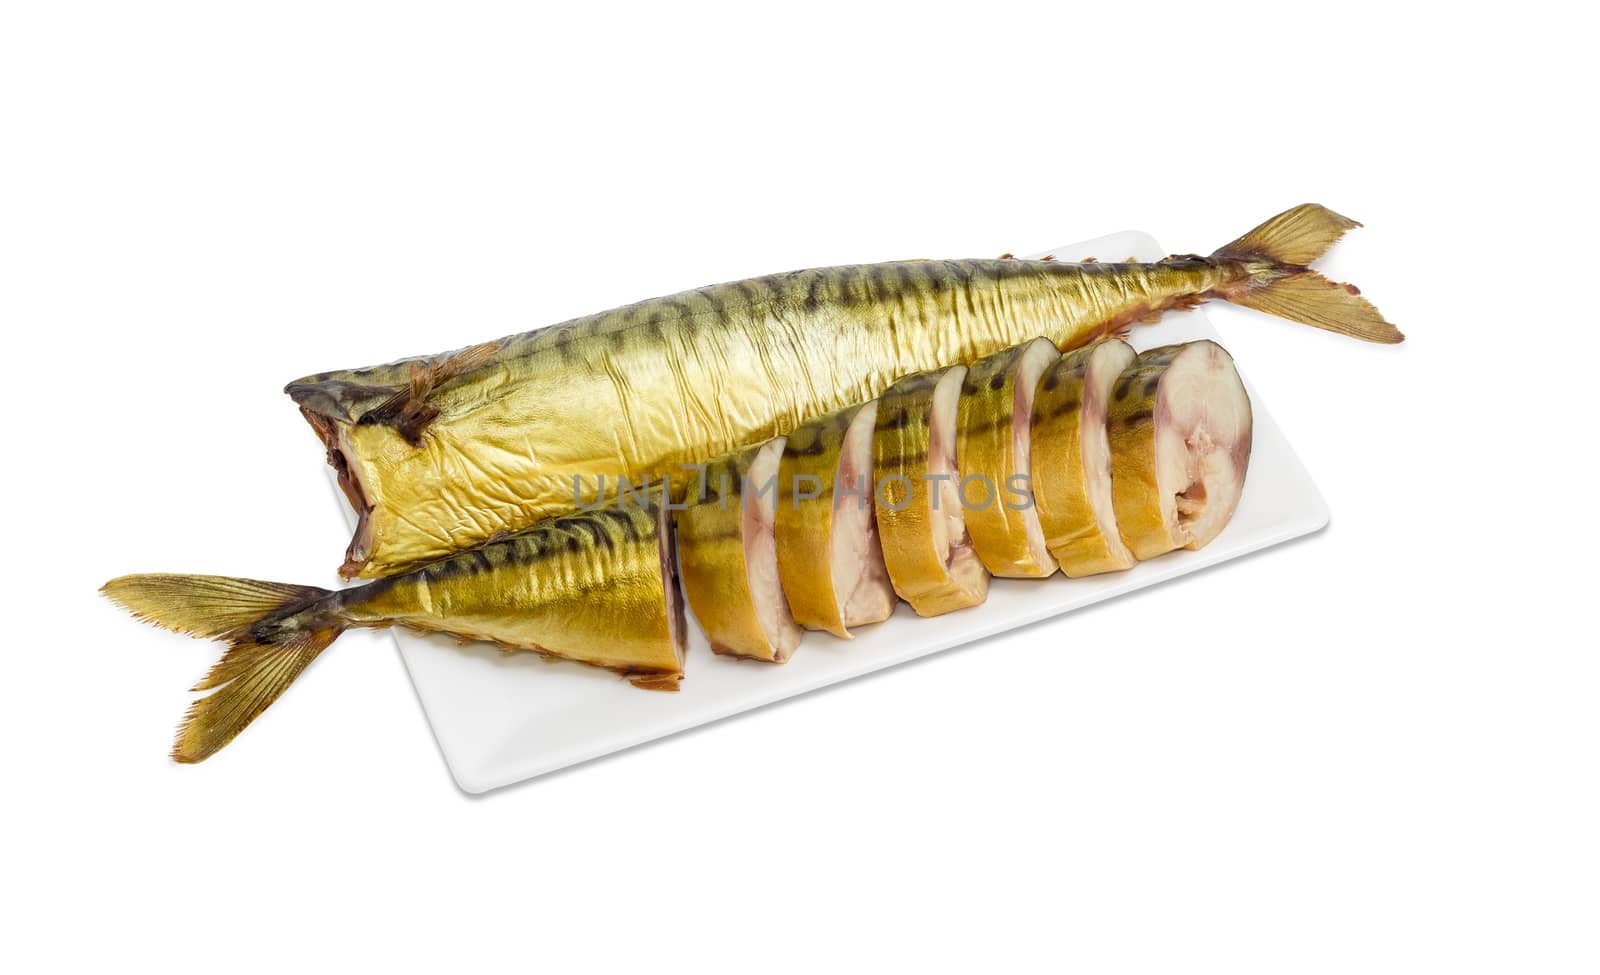 One sliced and one whole cold-smoked Atlantic mackerel on a rectangular white dish on a light background
